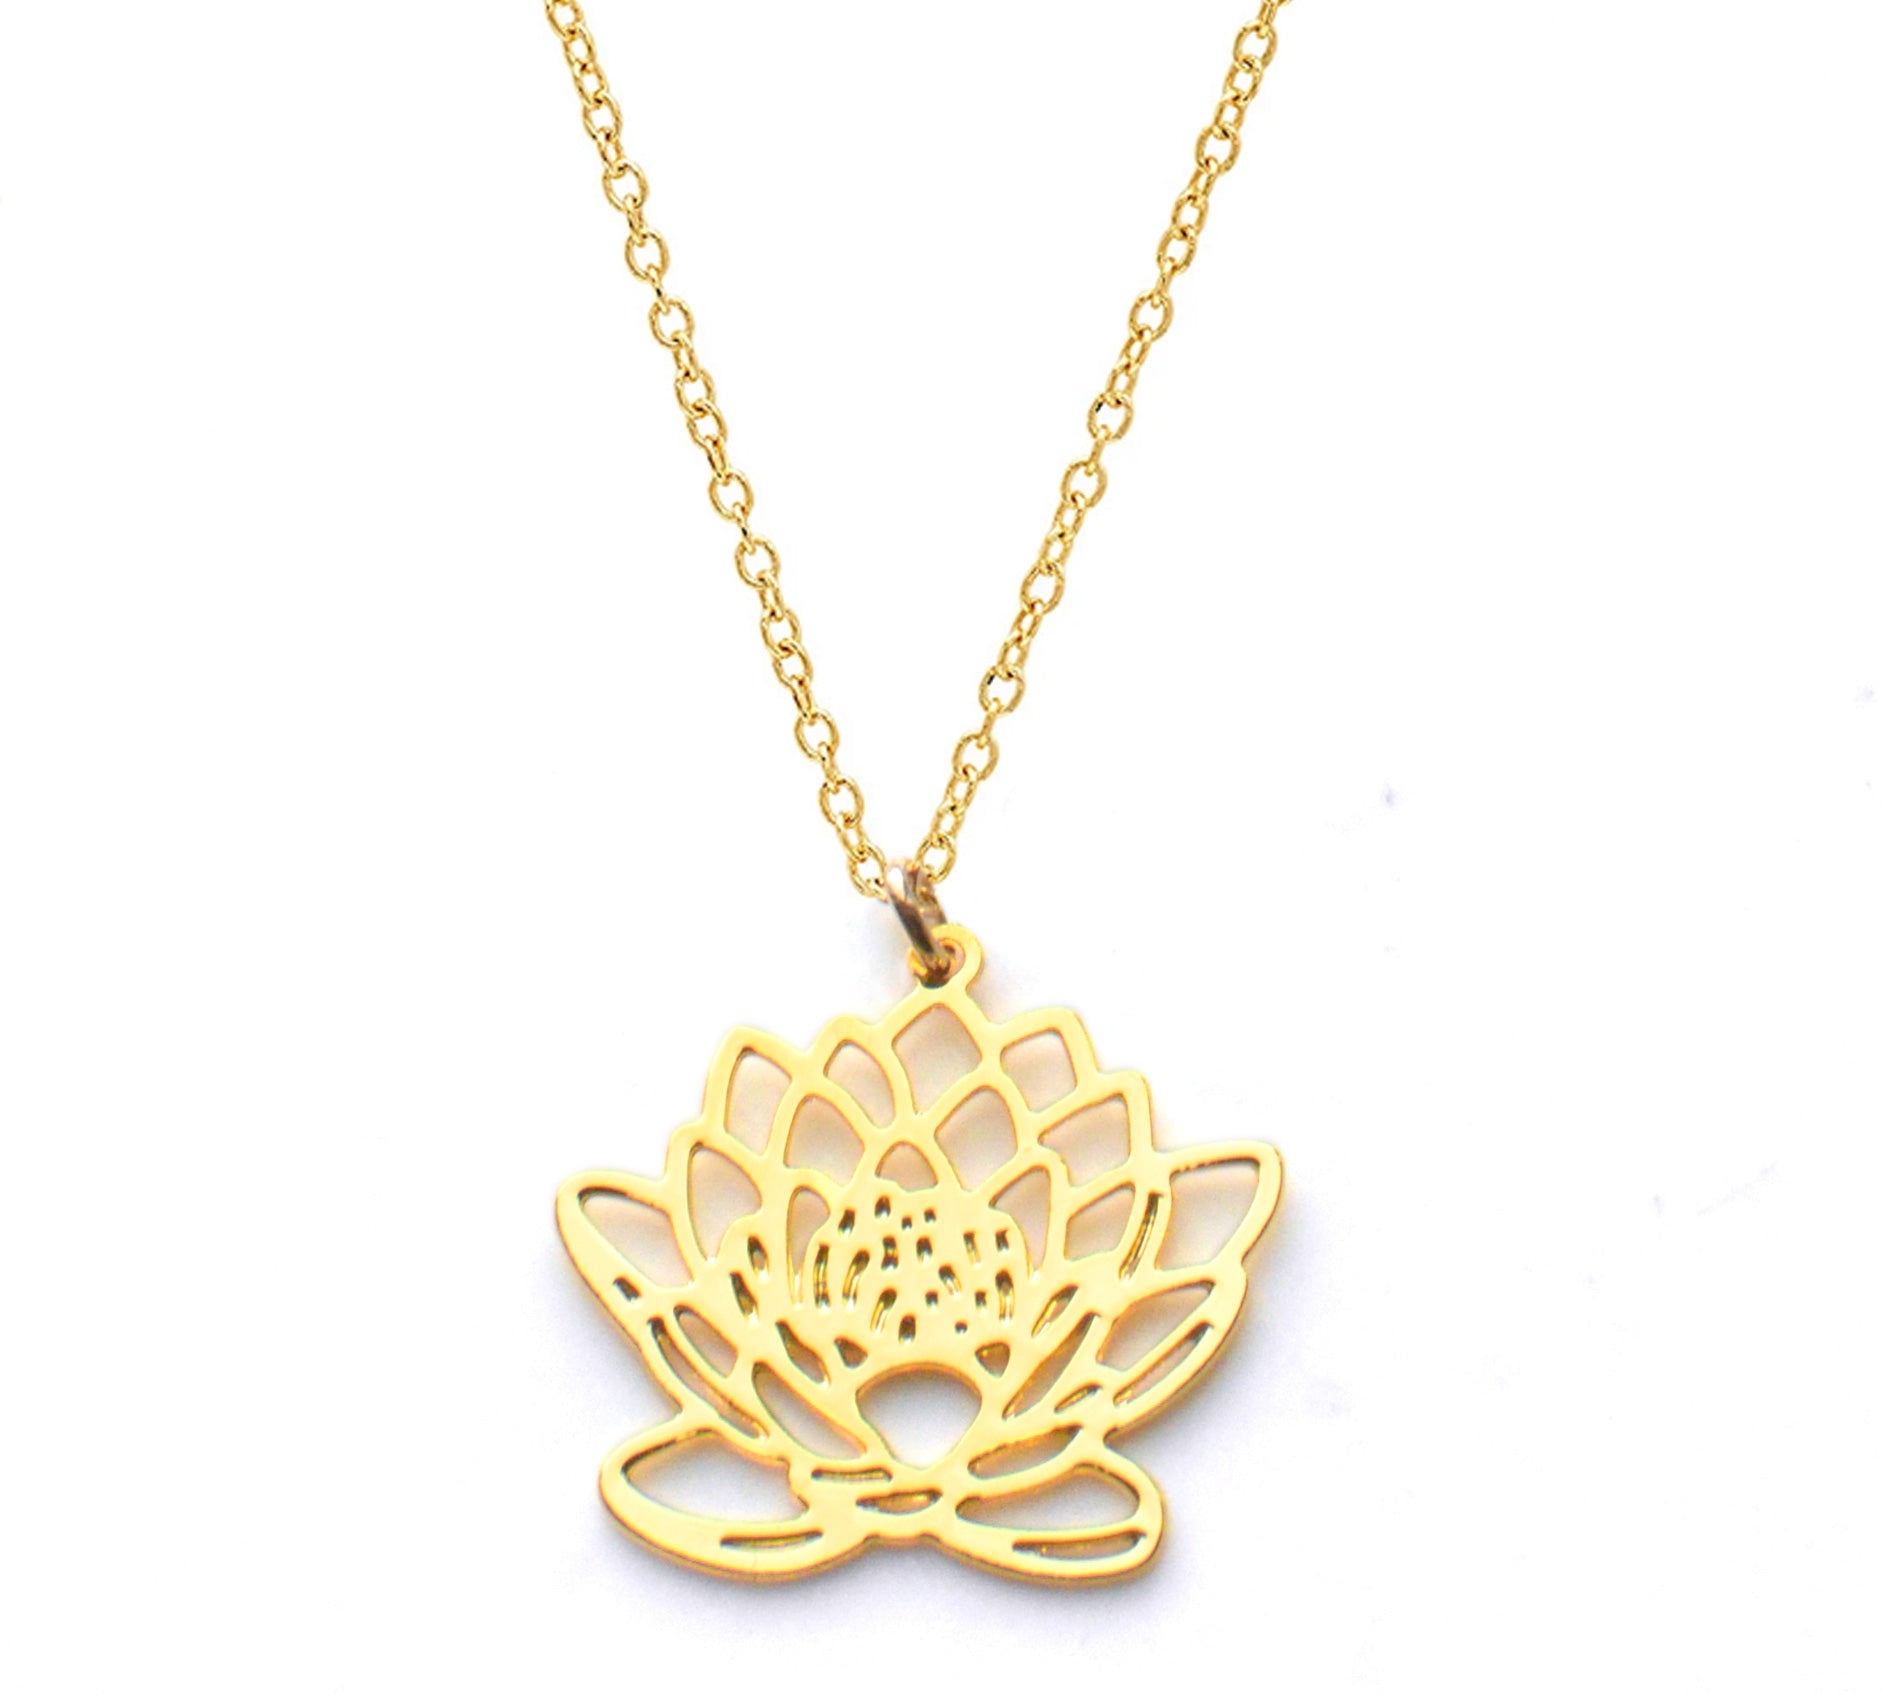 Water Lily Necklace - High Quality, Affordable, Whimsical, Hand Drawn Necklace - July Birthday Gift - Available in Gold and Silver - Made in USA - Brevity Jewelry